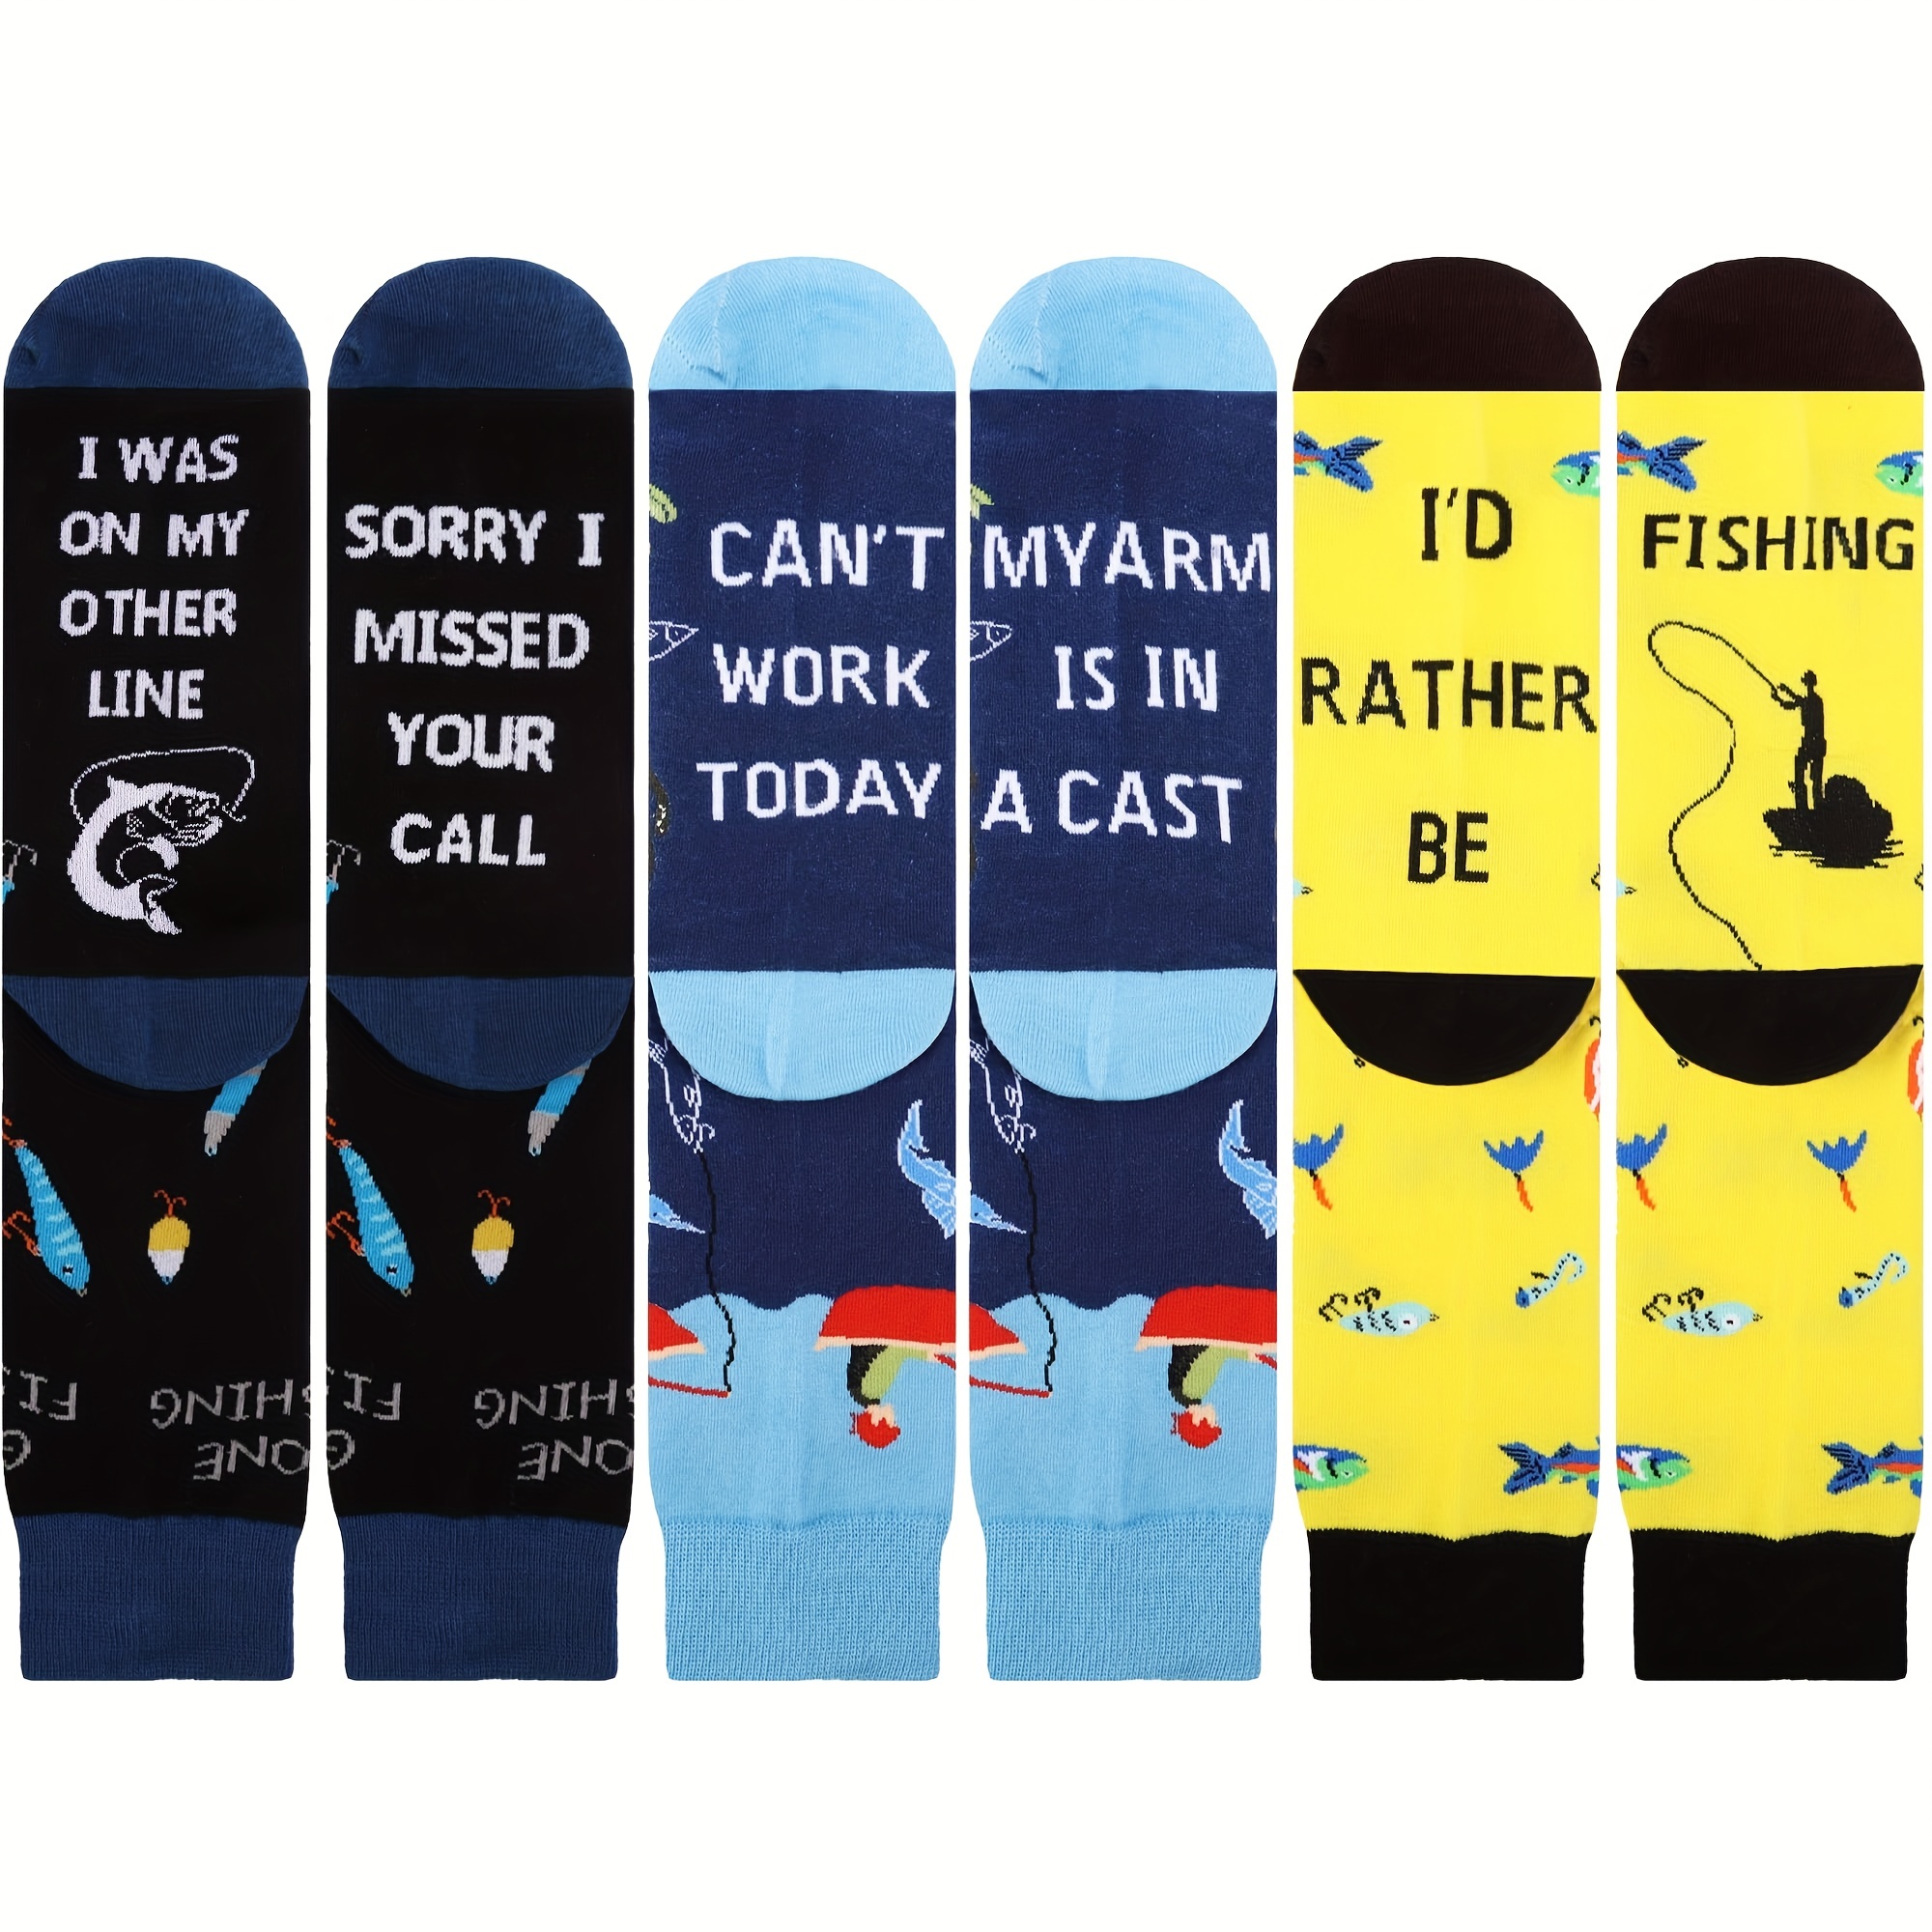 

3 Paris Men's Fishing-themed Crew Socks - Fun, Funky, And Novelty Cool Socks For Dress Or Casual Wear